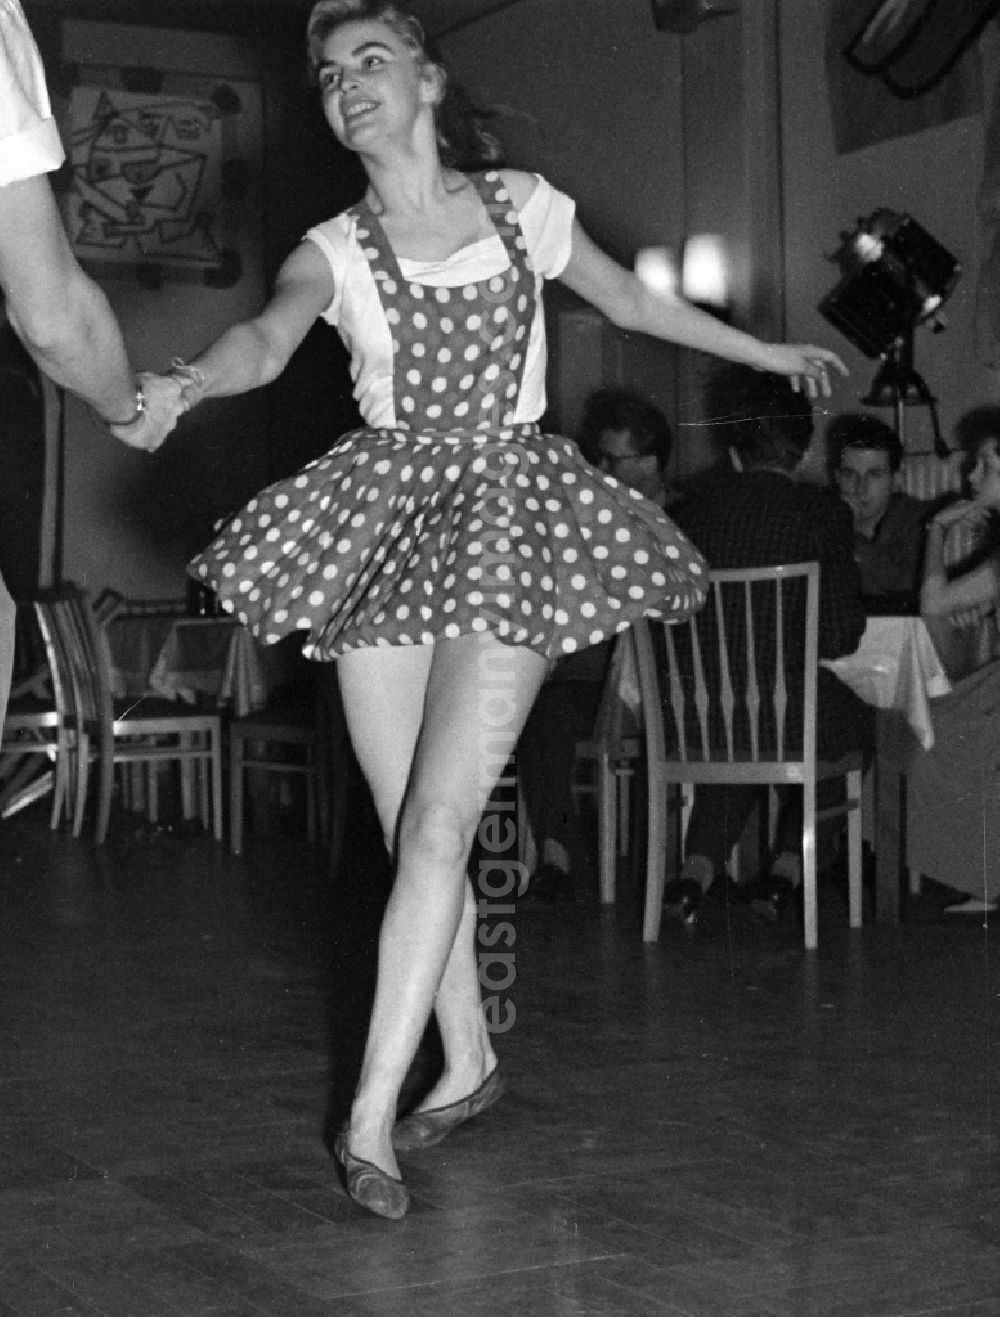 GDR image archive: Potsdam - The actress Christel Bodenstein during a carnival event at the film school in the district Babelsberg in Potsdam in the state Brandenburg on the territory of the former GDR, German Democratic Republic